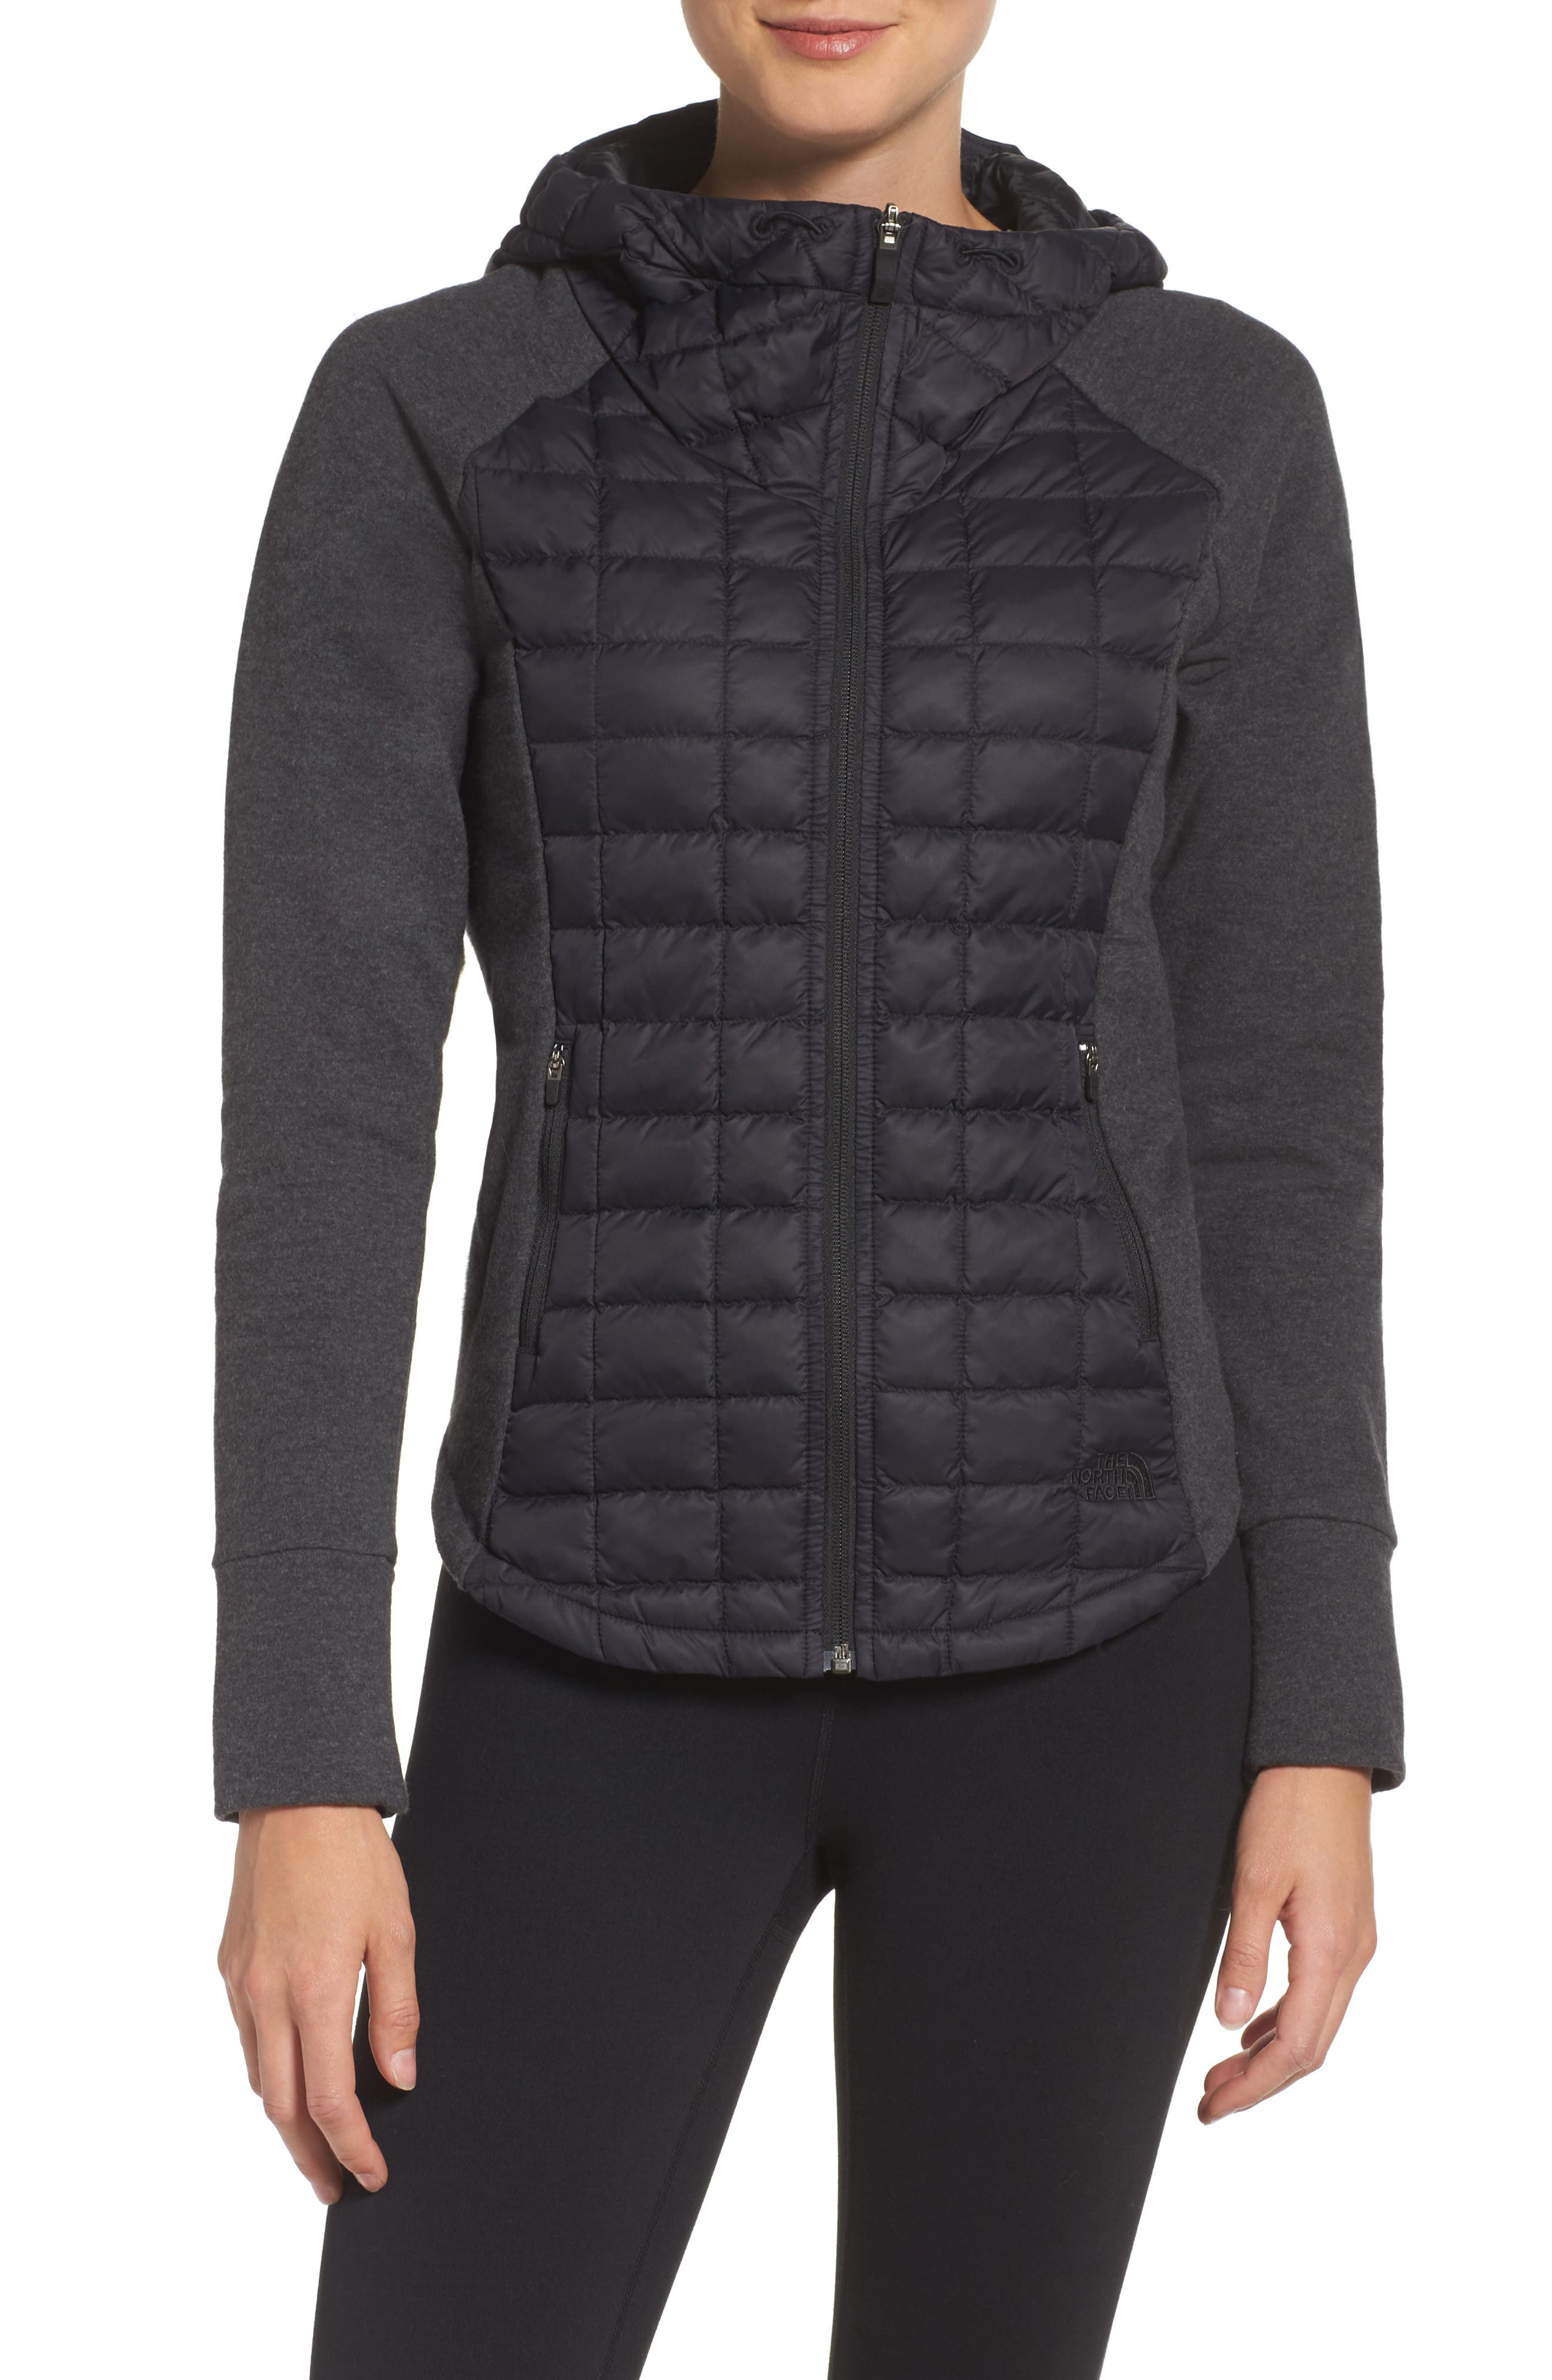 north face endeavor thermoball